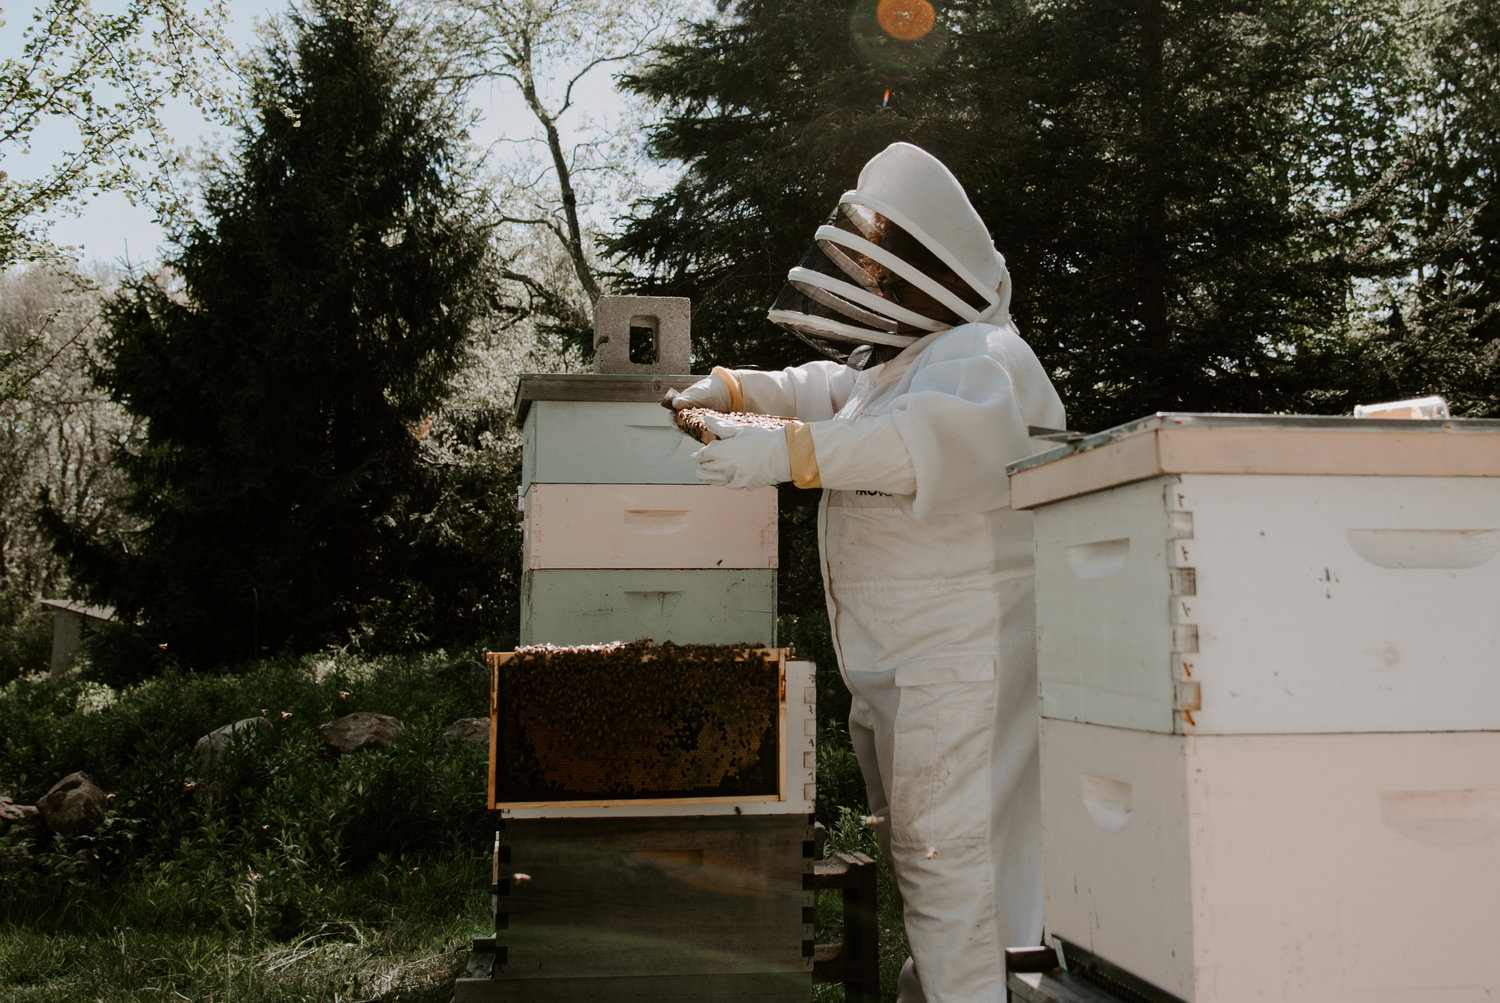 bee suits are integral to keeping safe while collecting